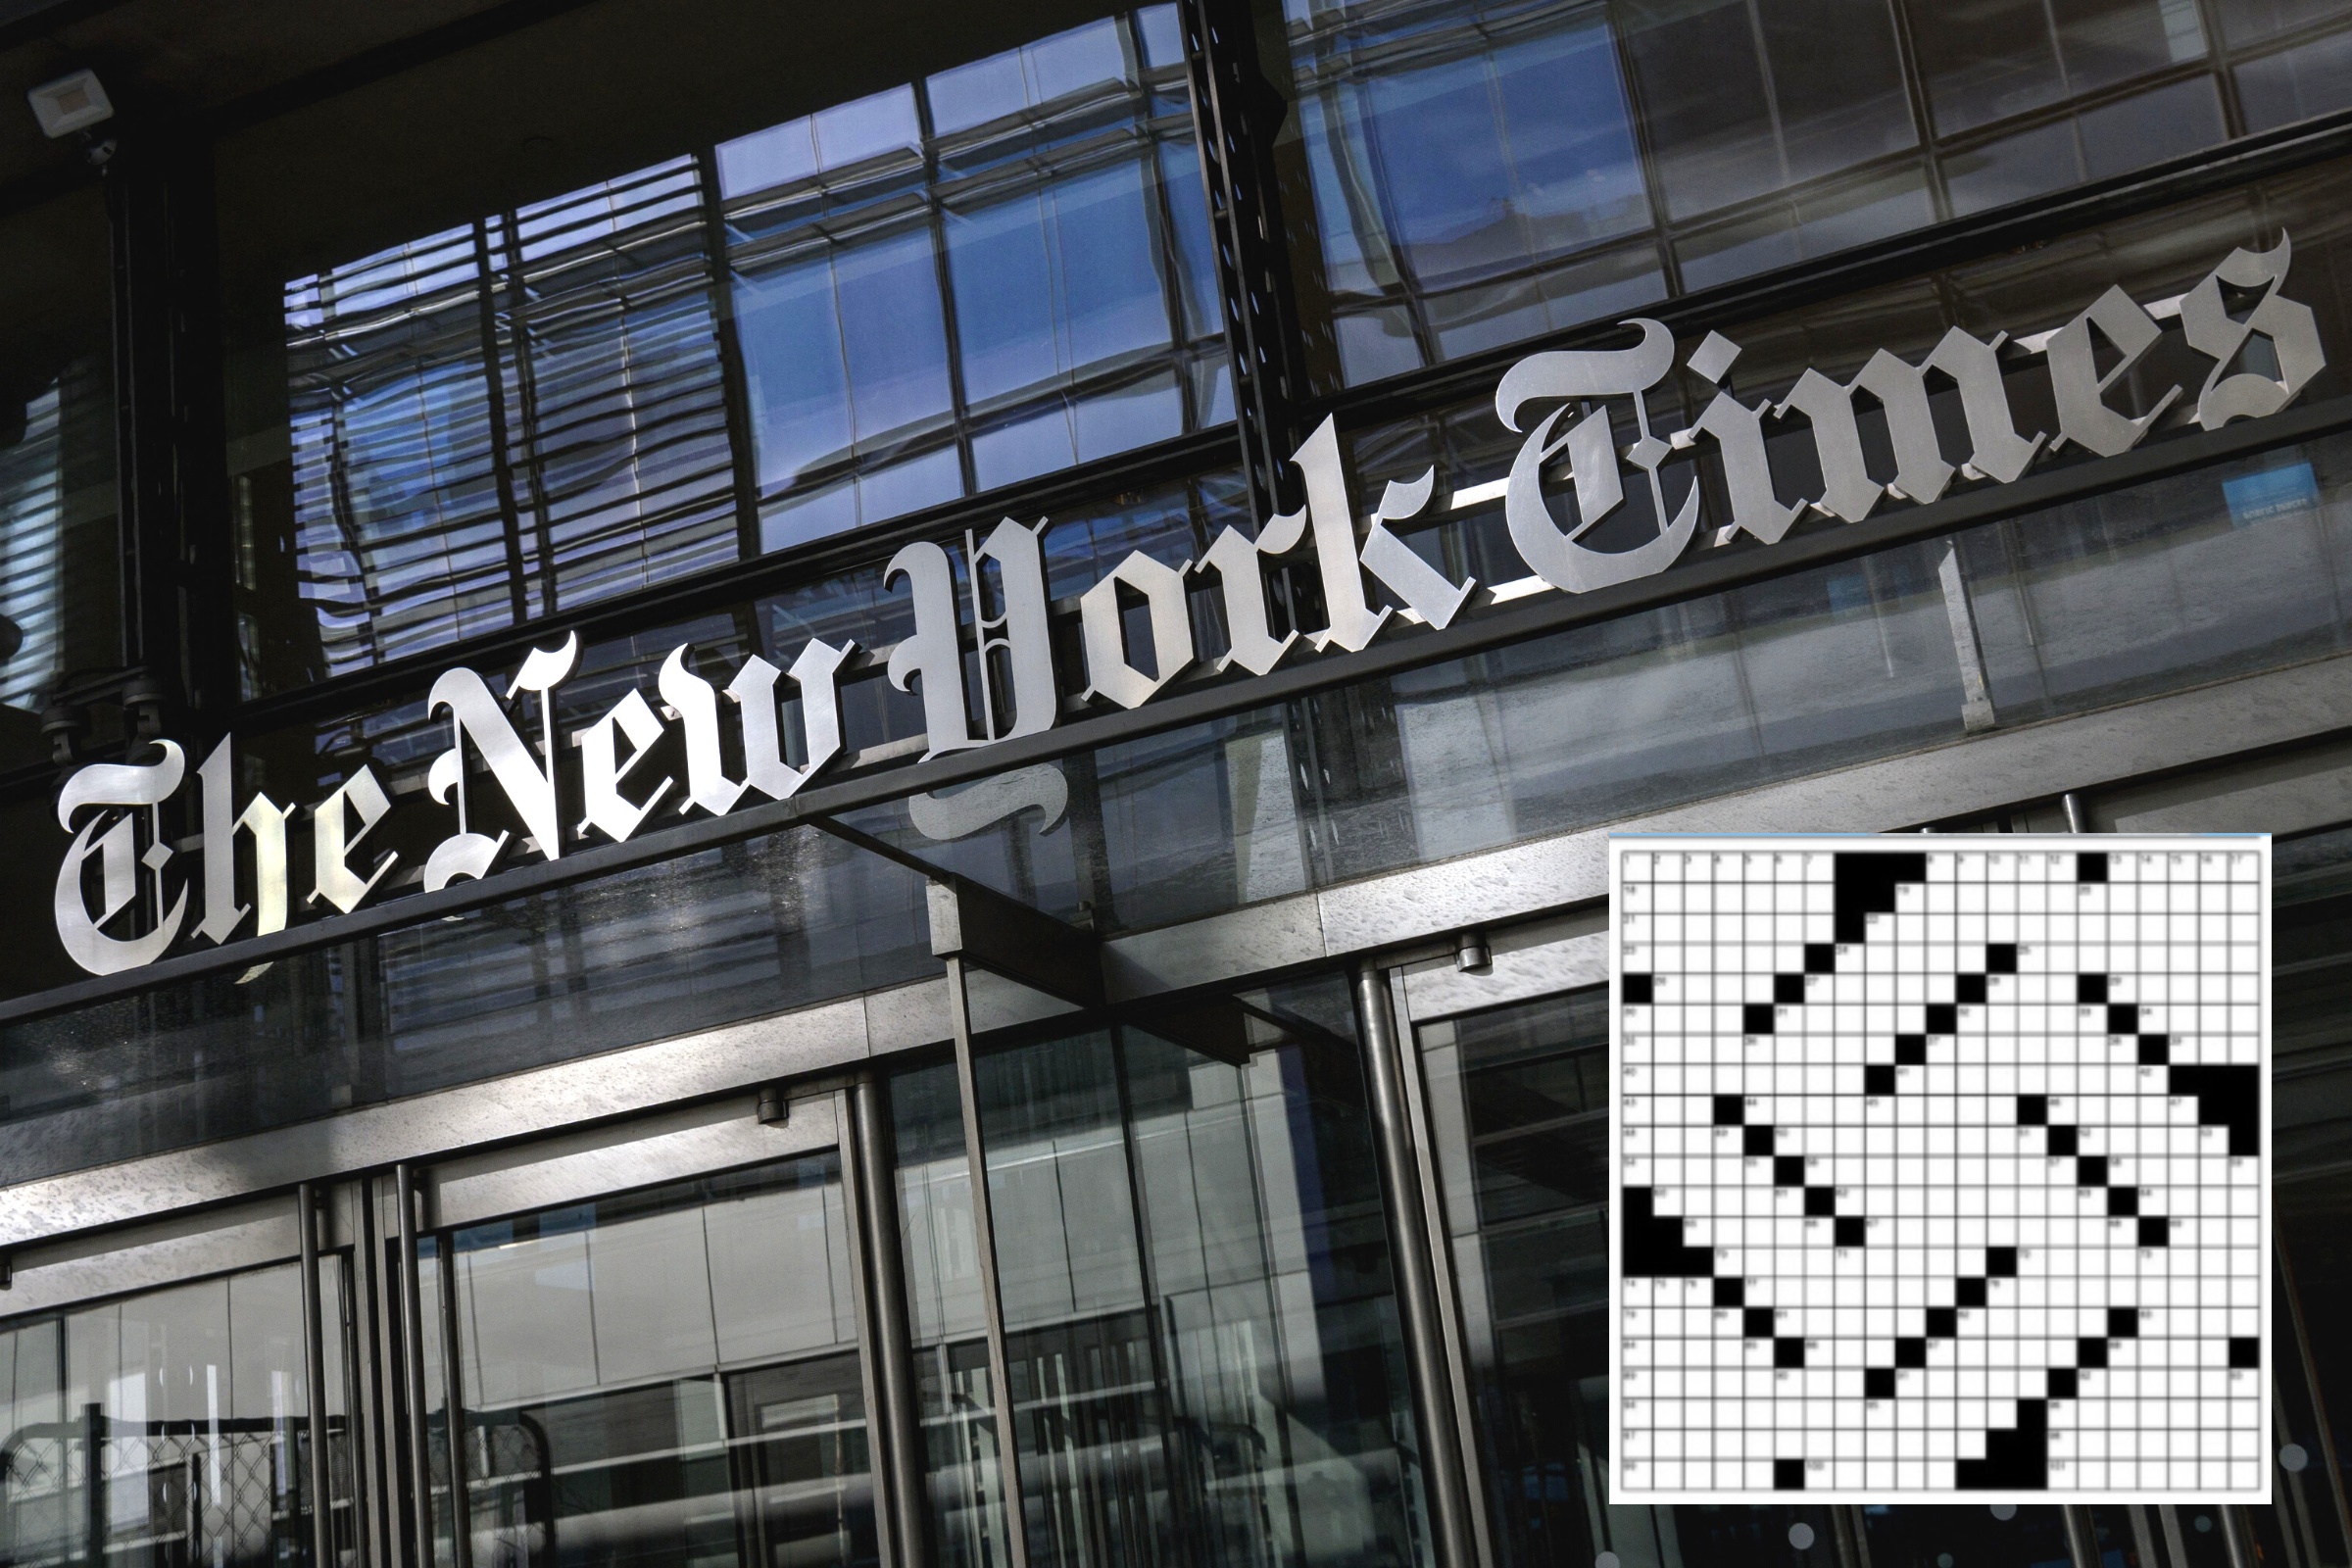 #39 NYT #39 Response to Prior Crossword Swastika Accusations Resurfaces